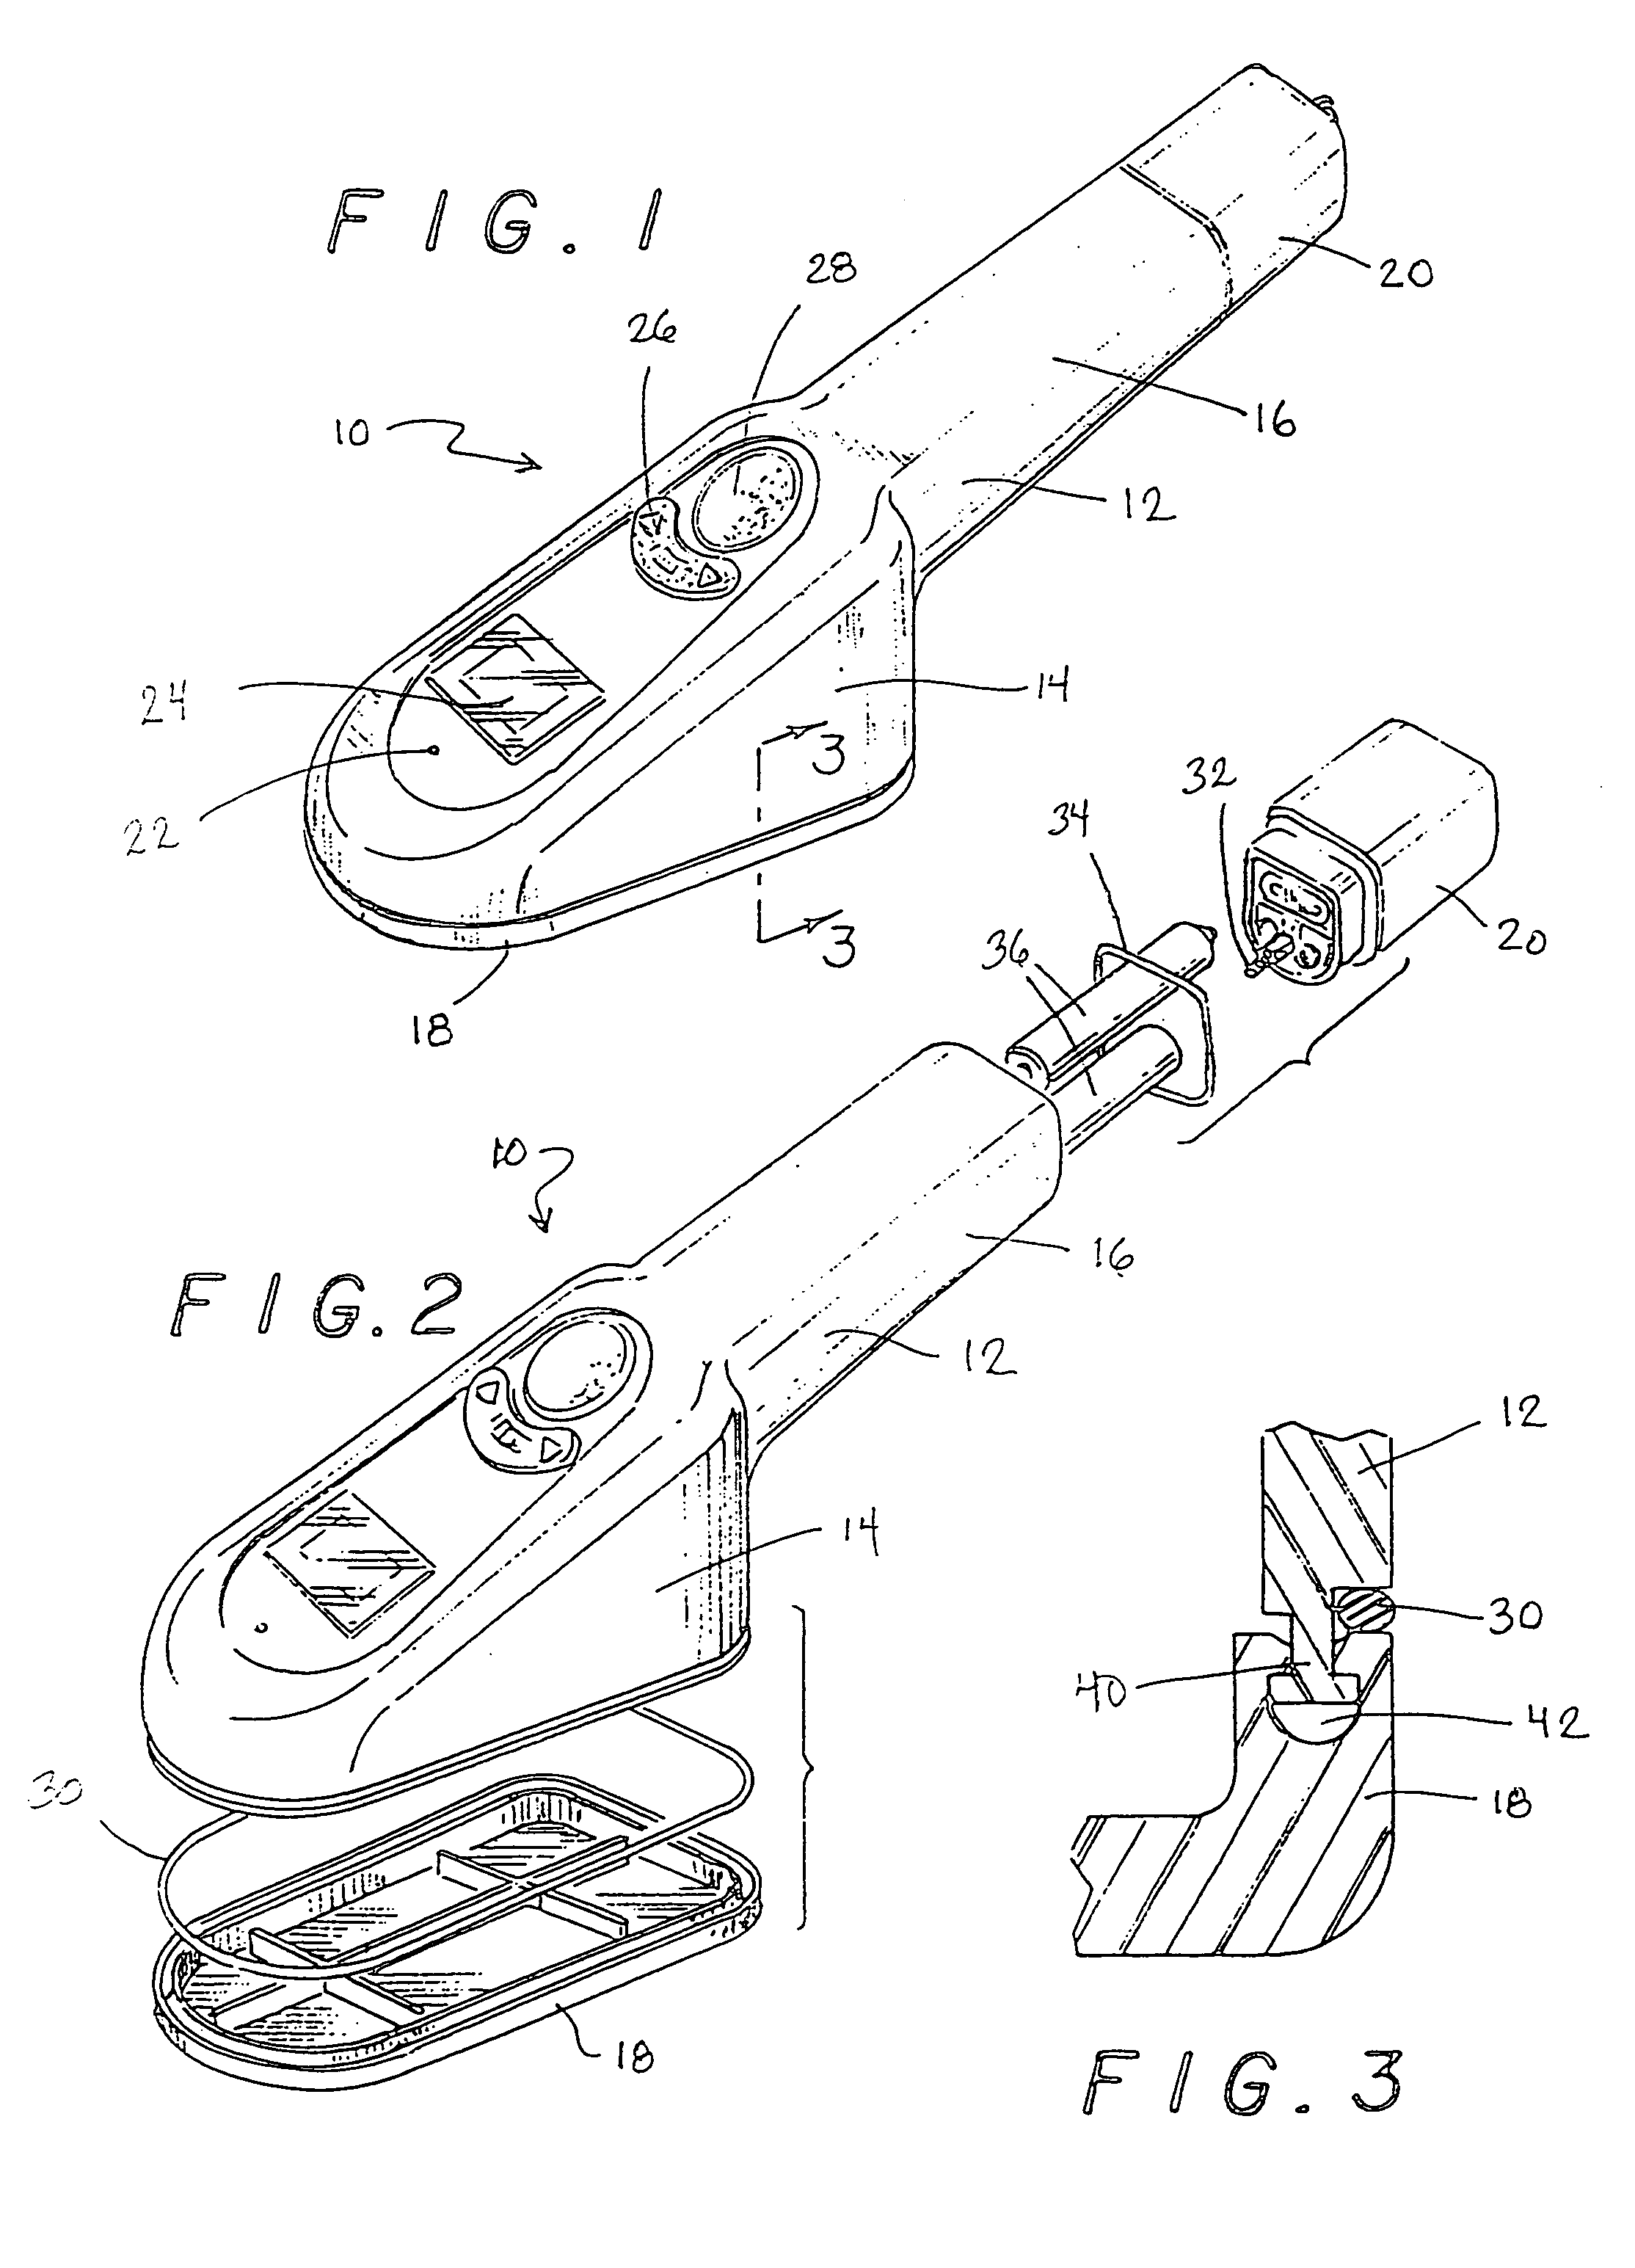 Housing for portable handheld electronic device